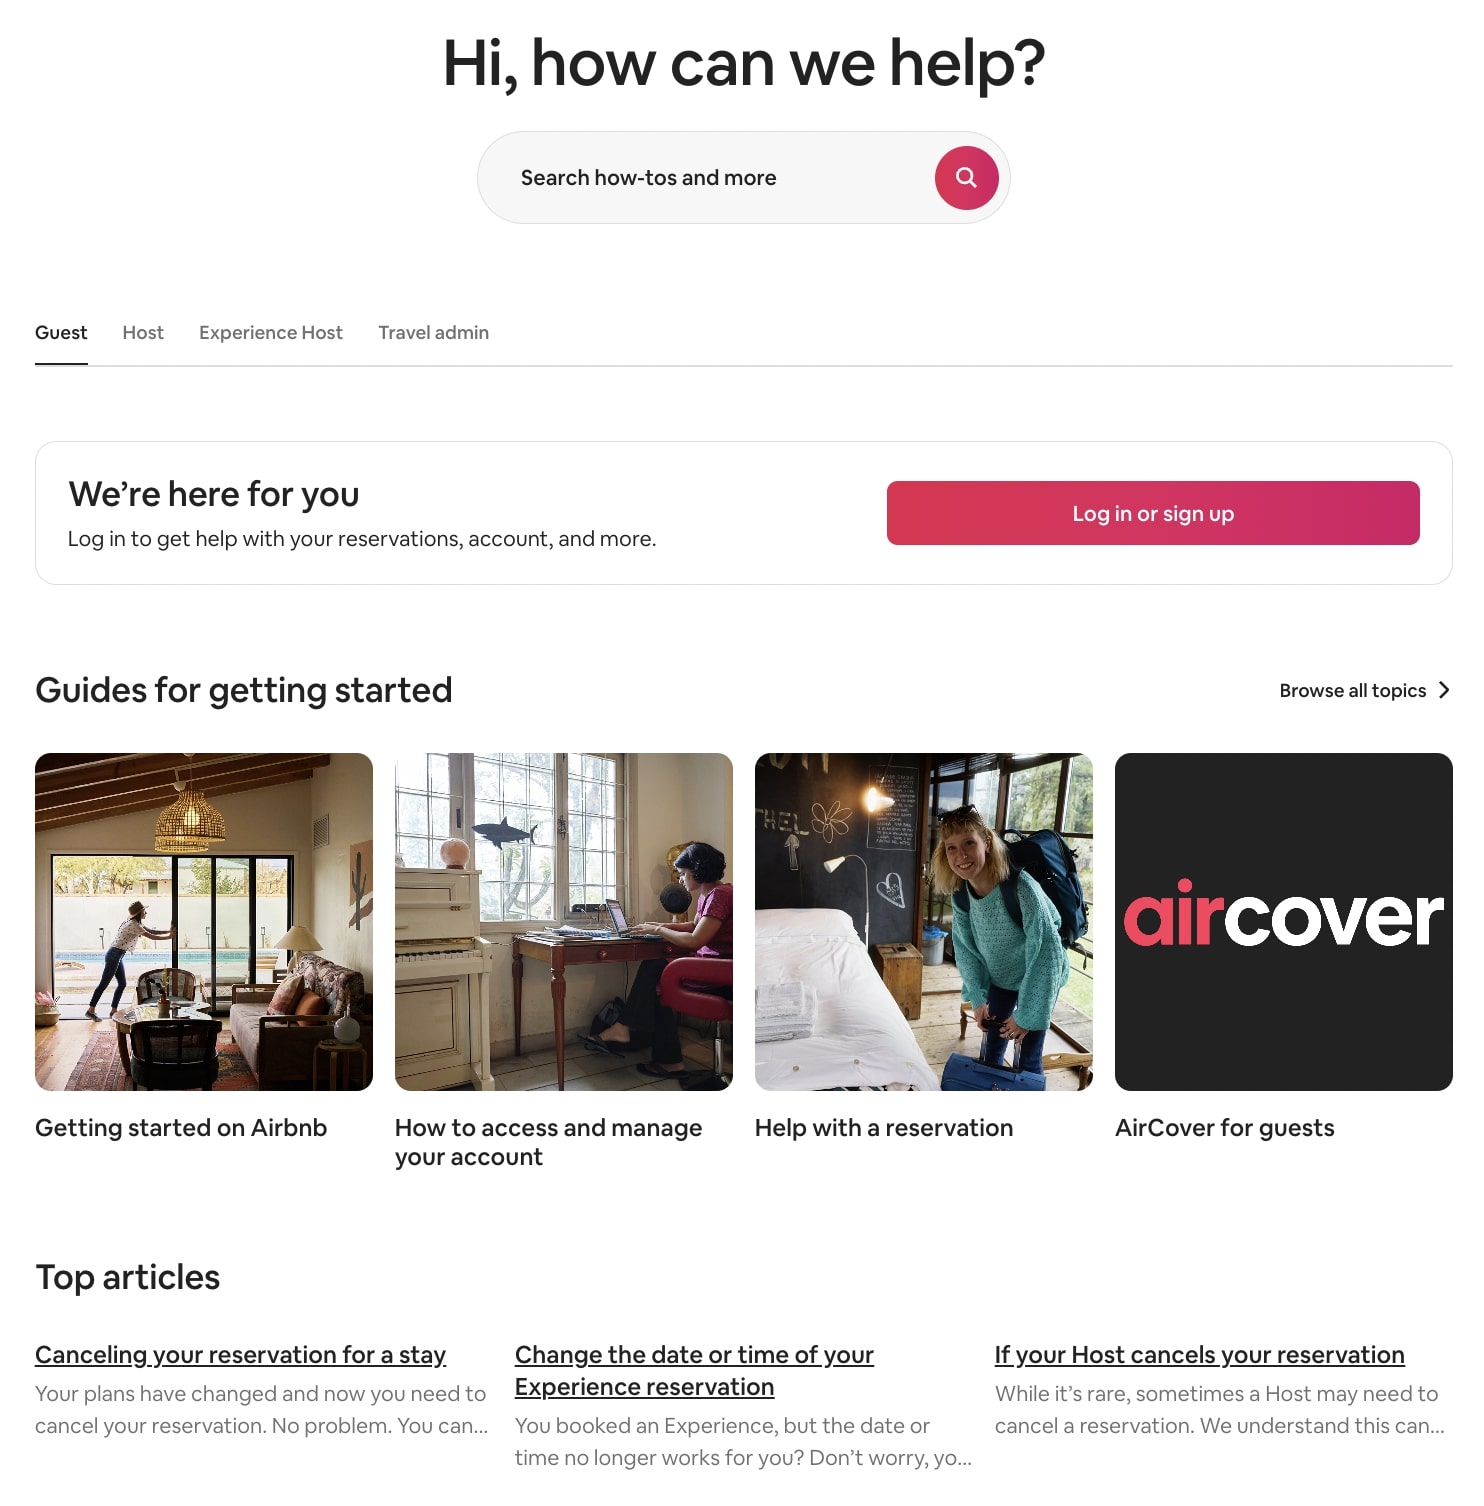 Airbnb’s "Hi, how can we help?" FAQ page